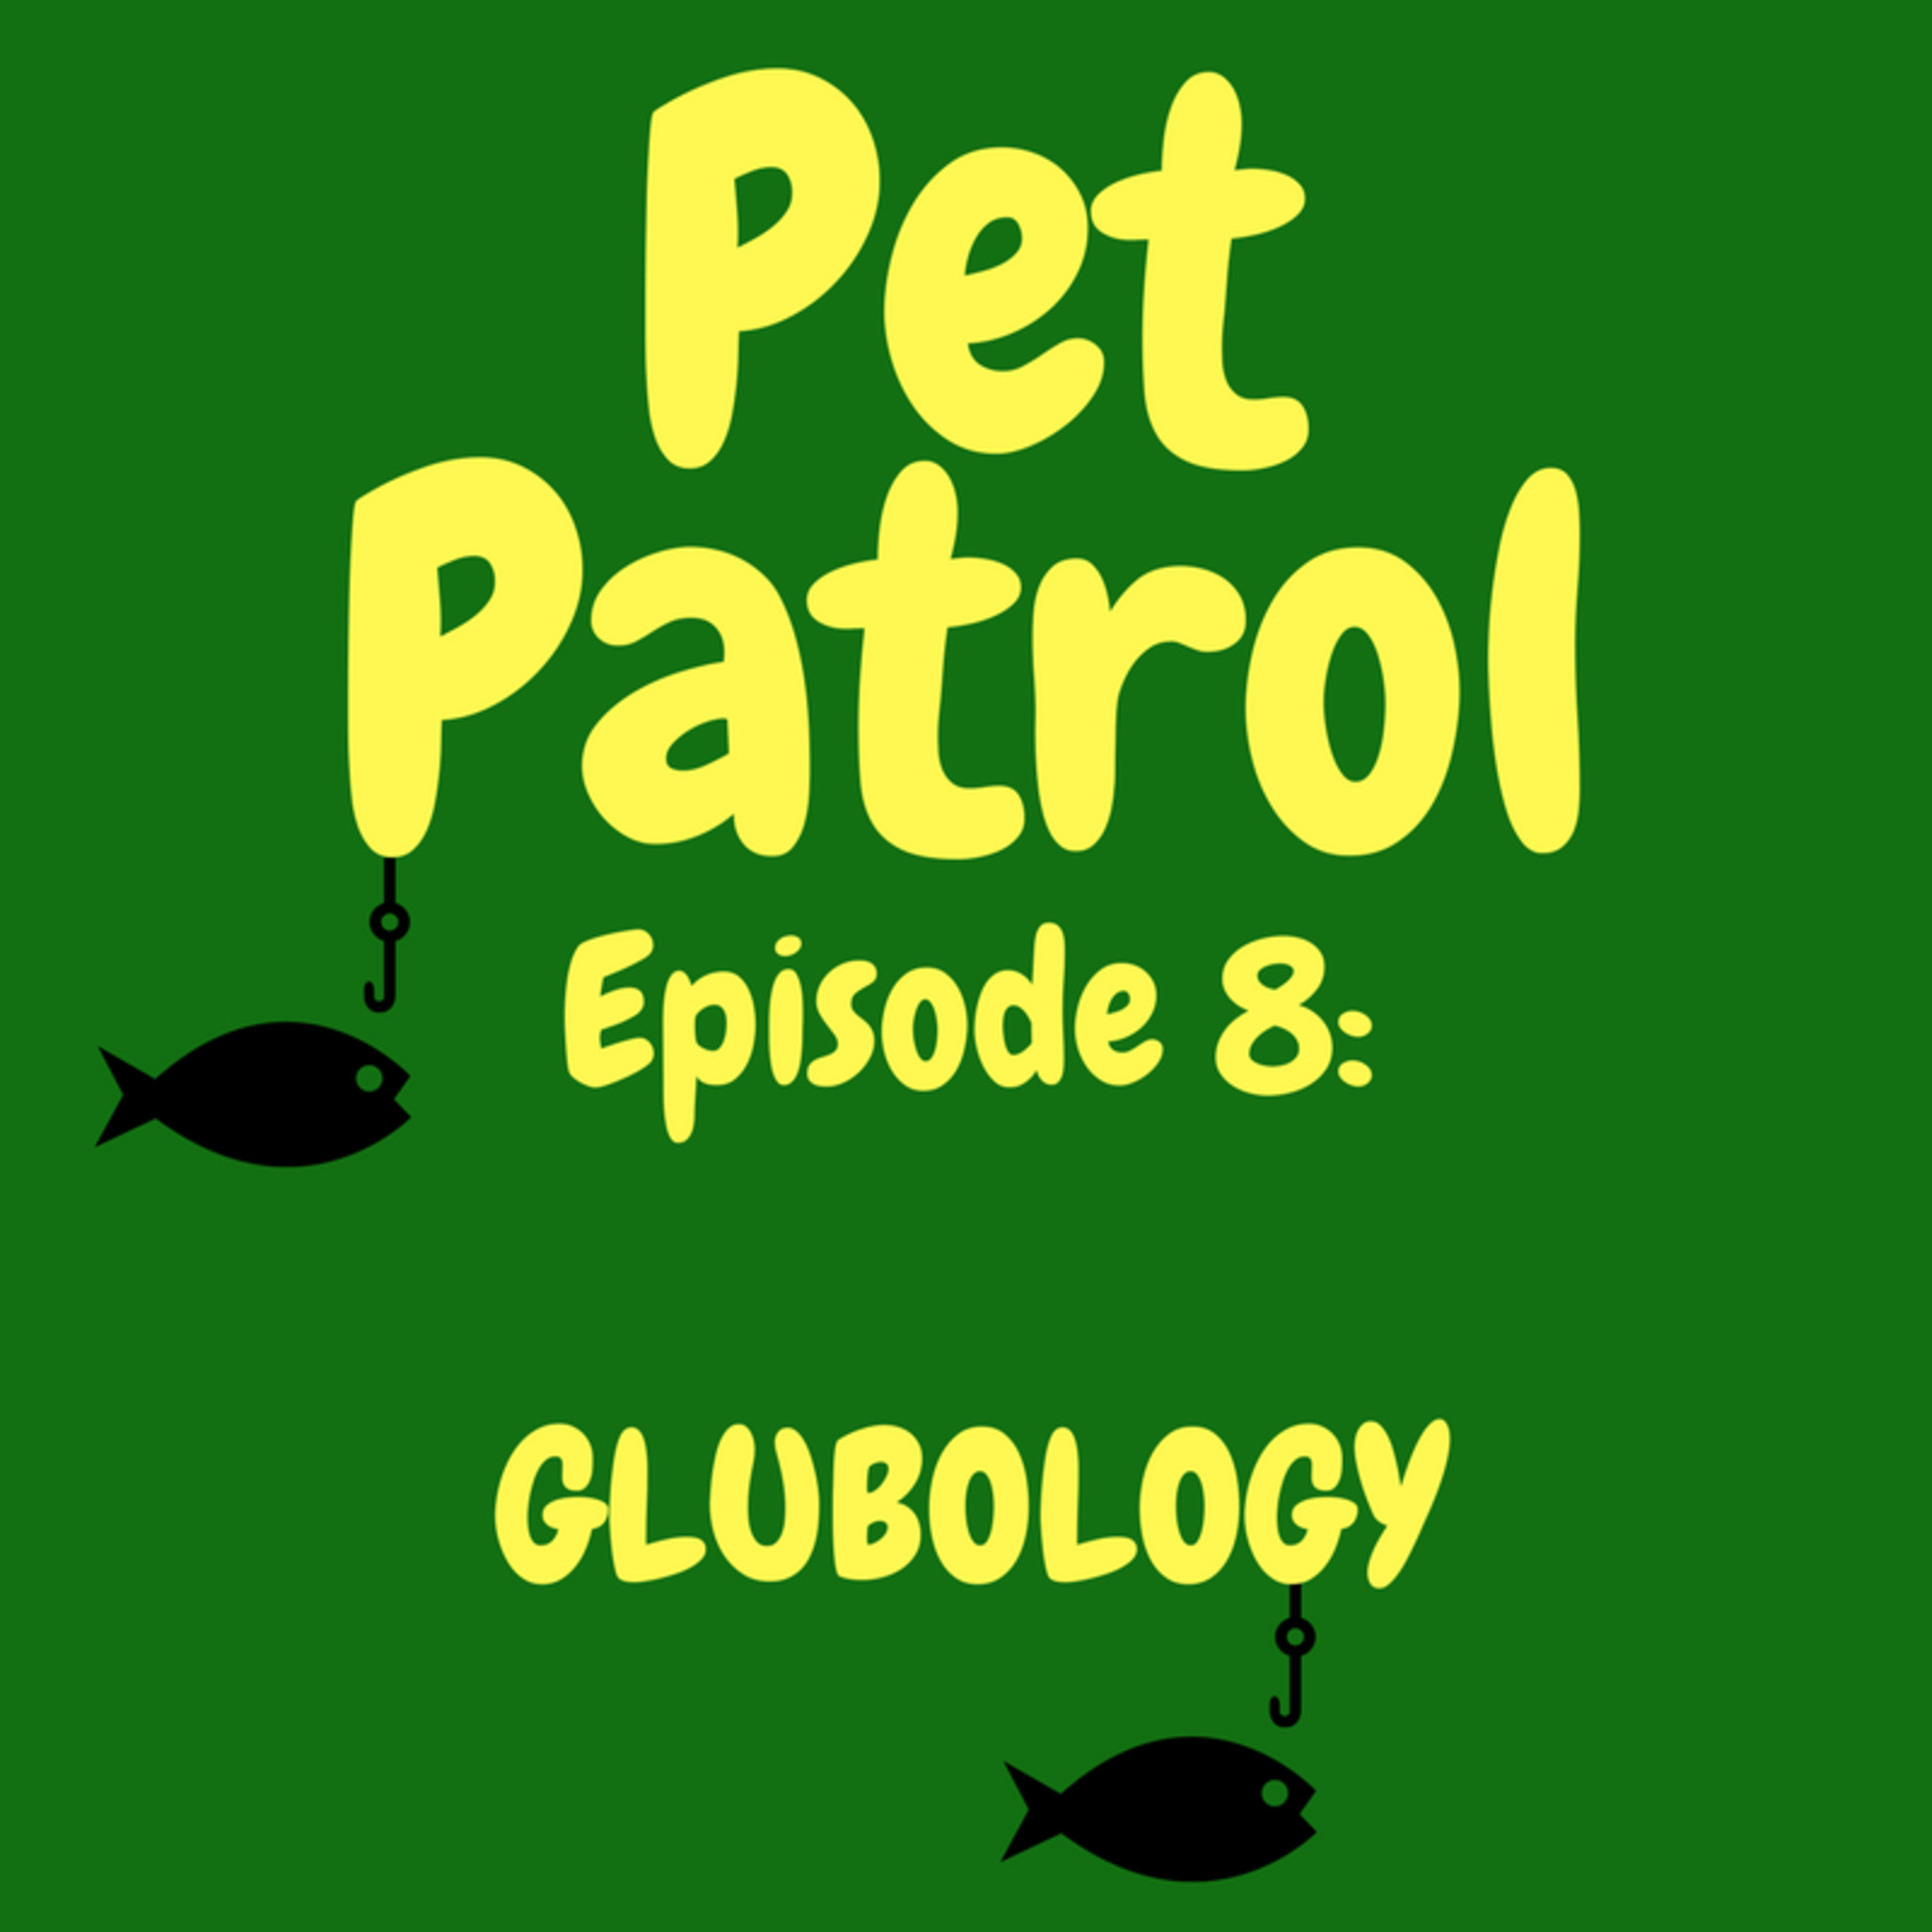 Glubology - App Recommendations for Fish